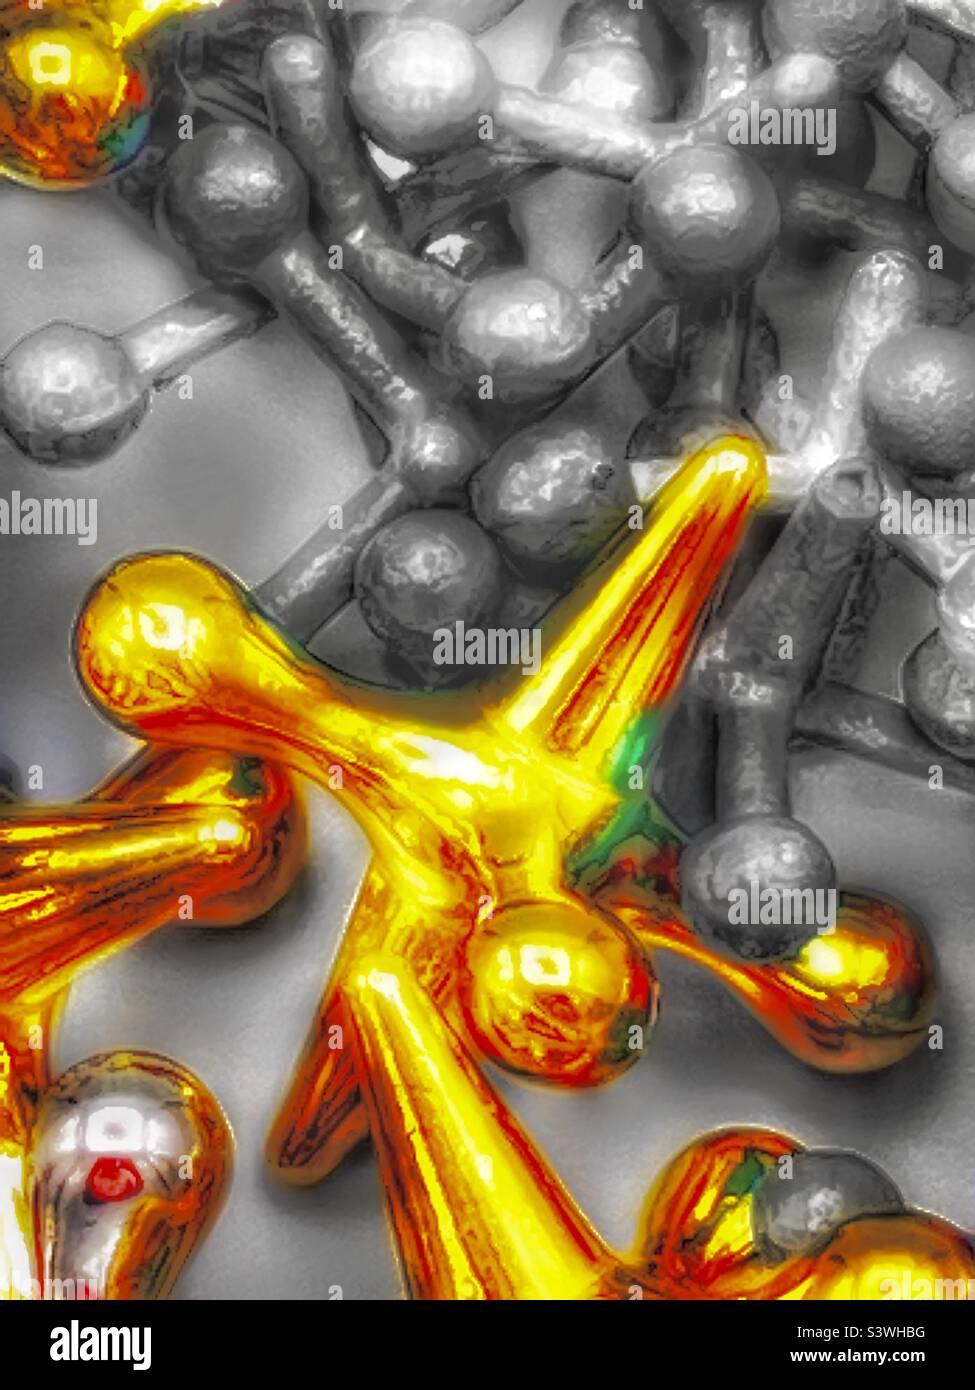 An abstract using jacks of varying sizes, textures and colors. The jumbo, or larger jacks of silver and gold, are colored and contrast with the smaller jacks that are desaturated. Stock Photo